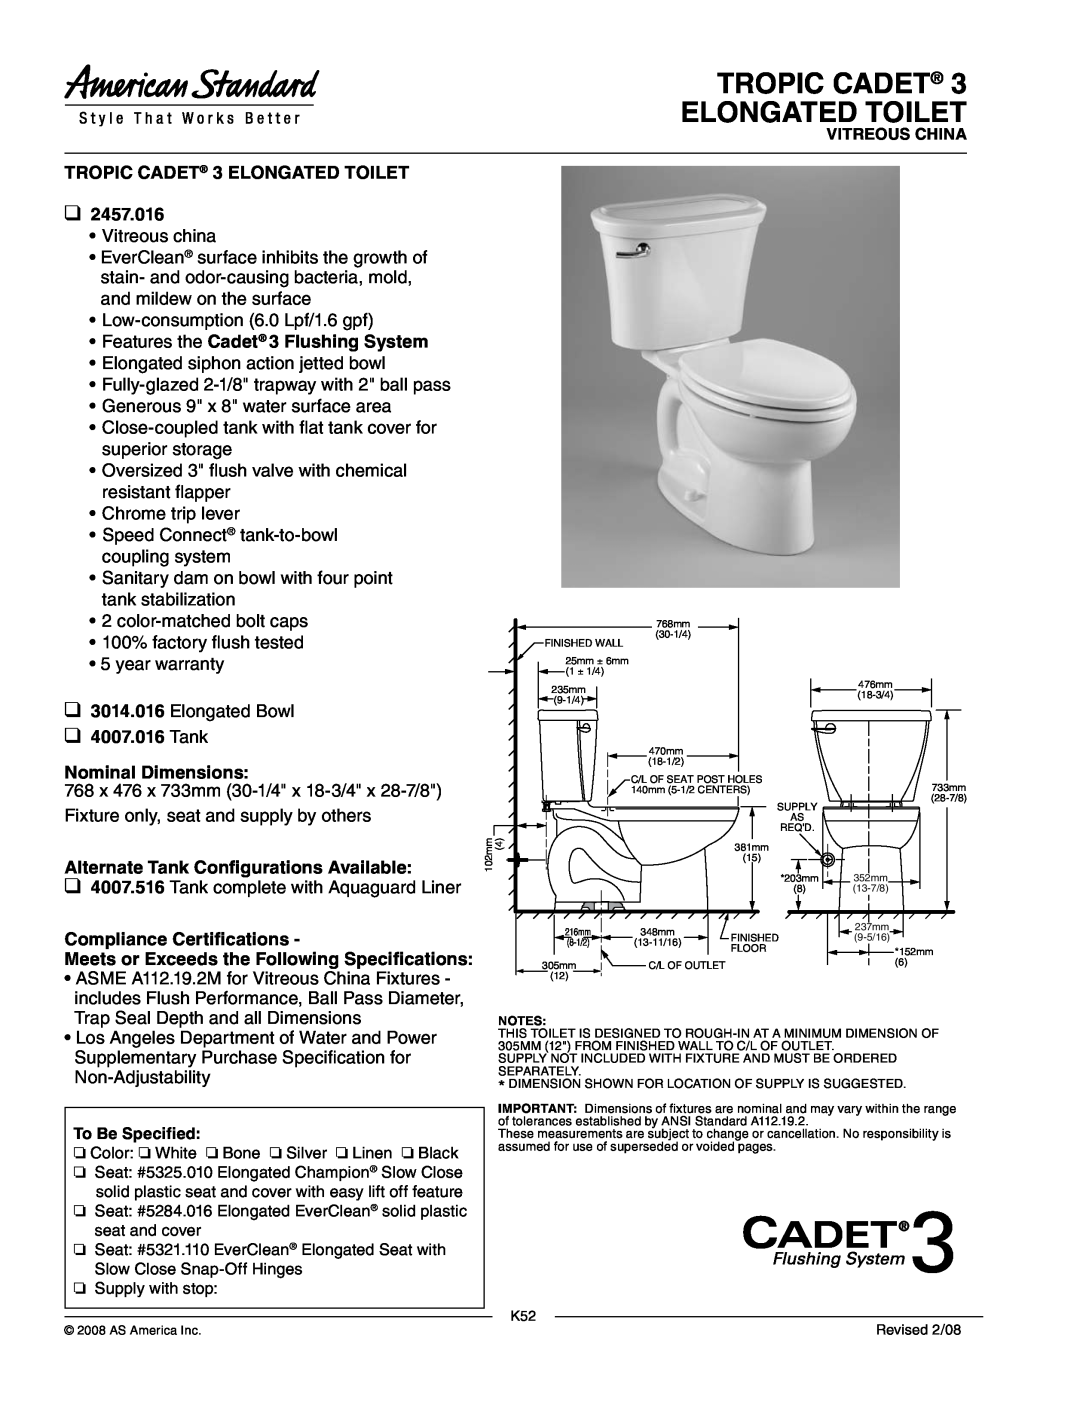 American Standard 2457.016 dimensions TROPIC CADET 3 ELONGATED TOILET, Features the Cadet 3 Flushing System, 3014.016 